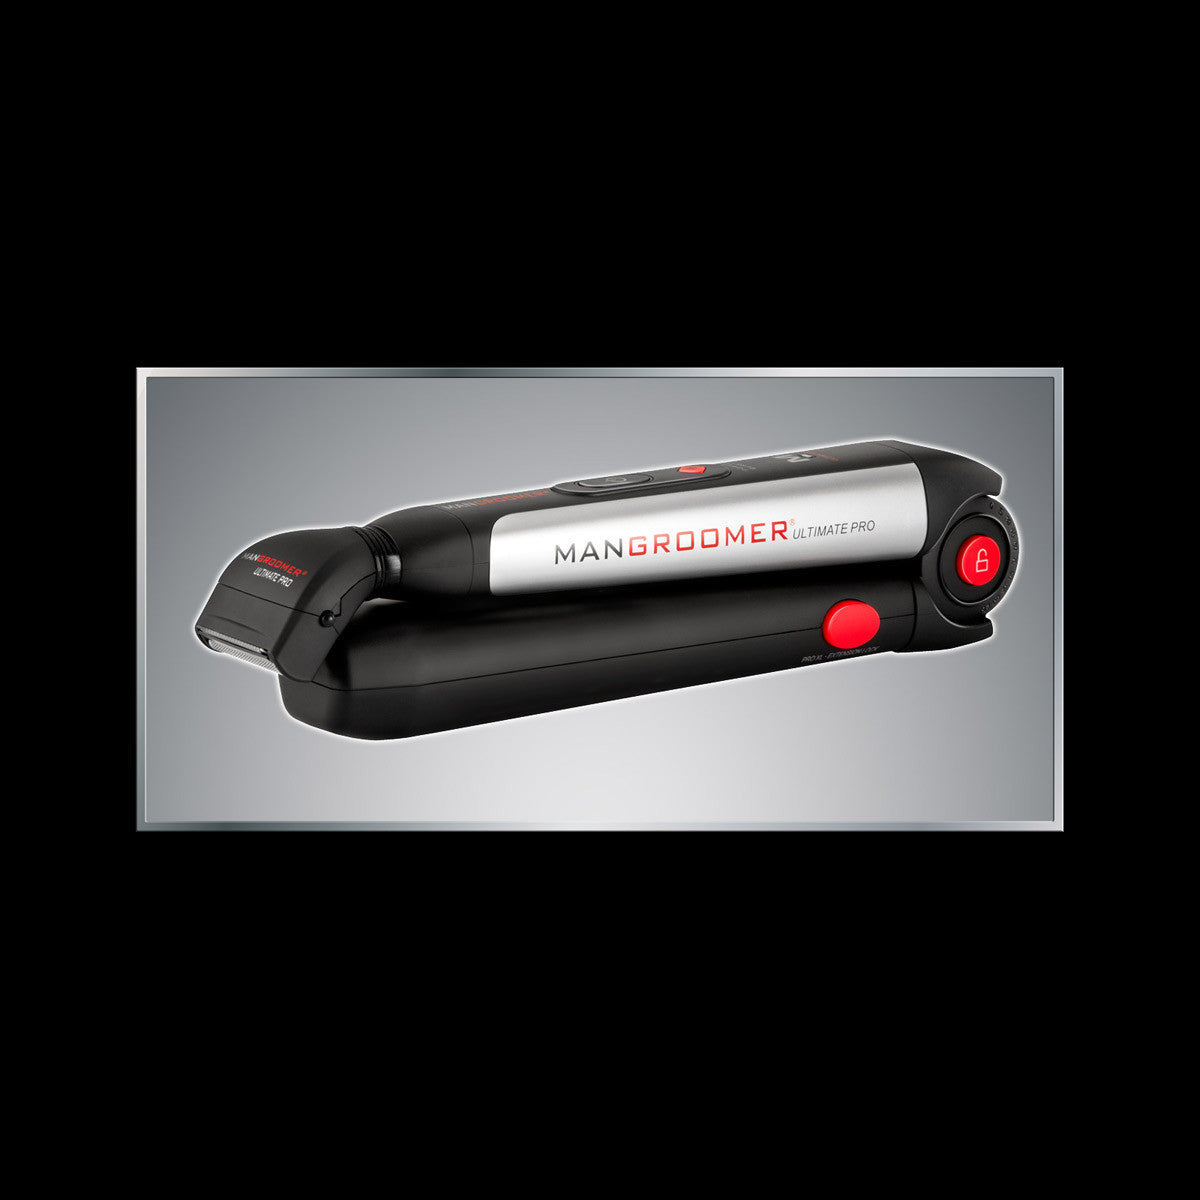 ULTIMATE PRO Back Hair Shaver and Trimmer in the closed, locked position for discreet storage and travel.